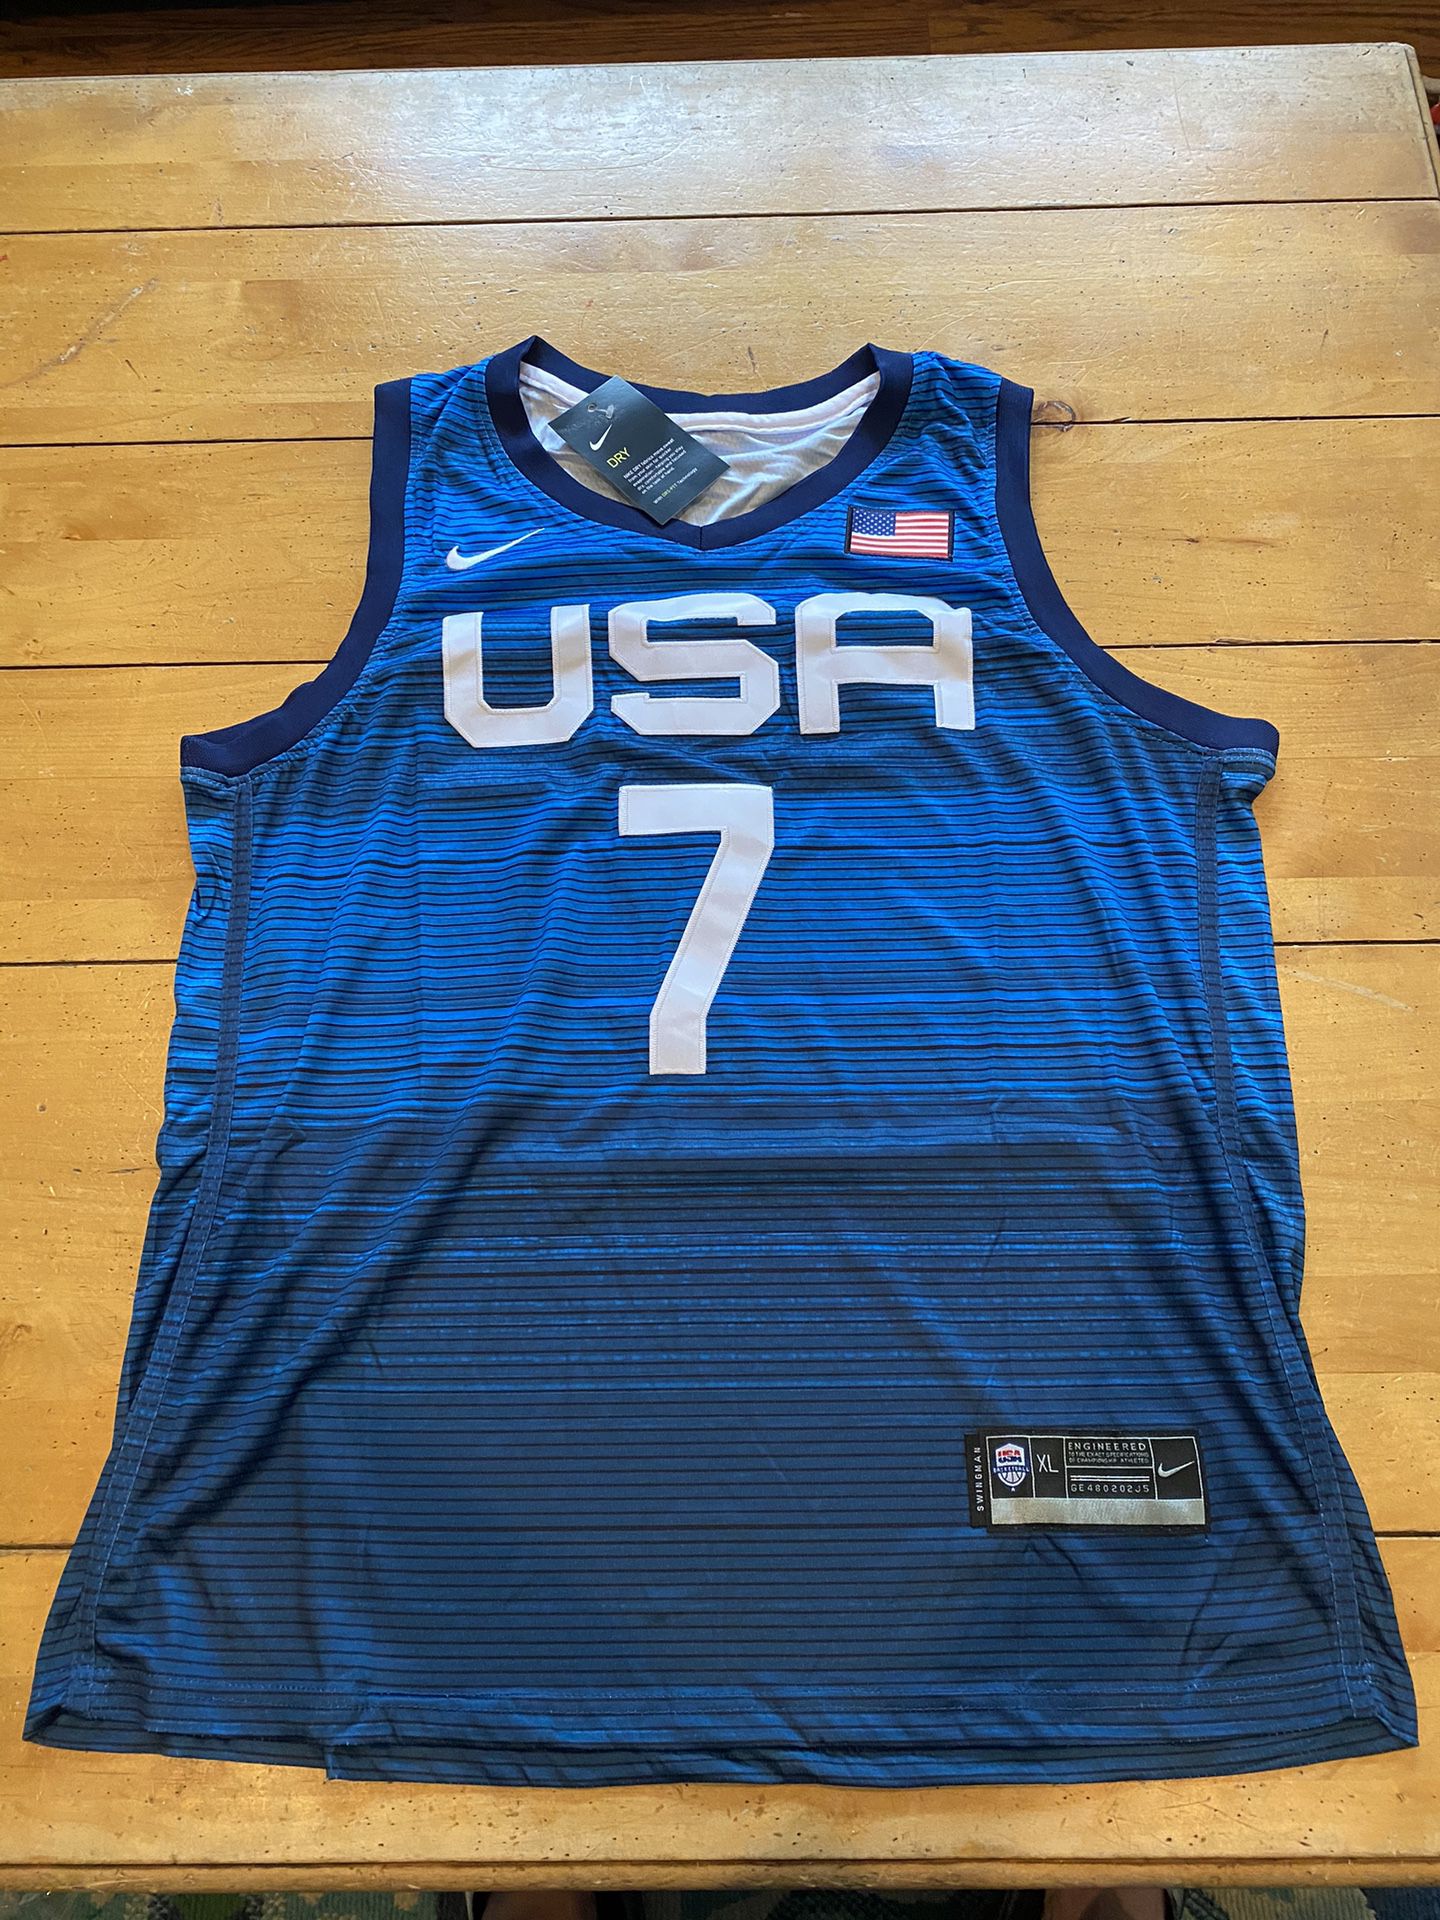 Kevin Durant USA Basketball Jersey 